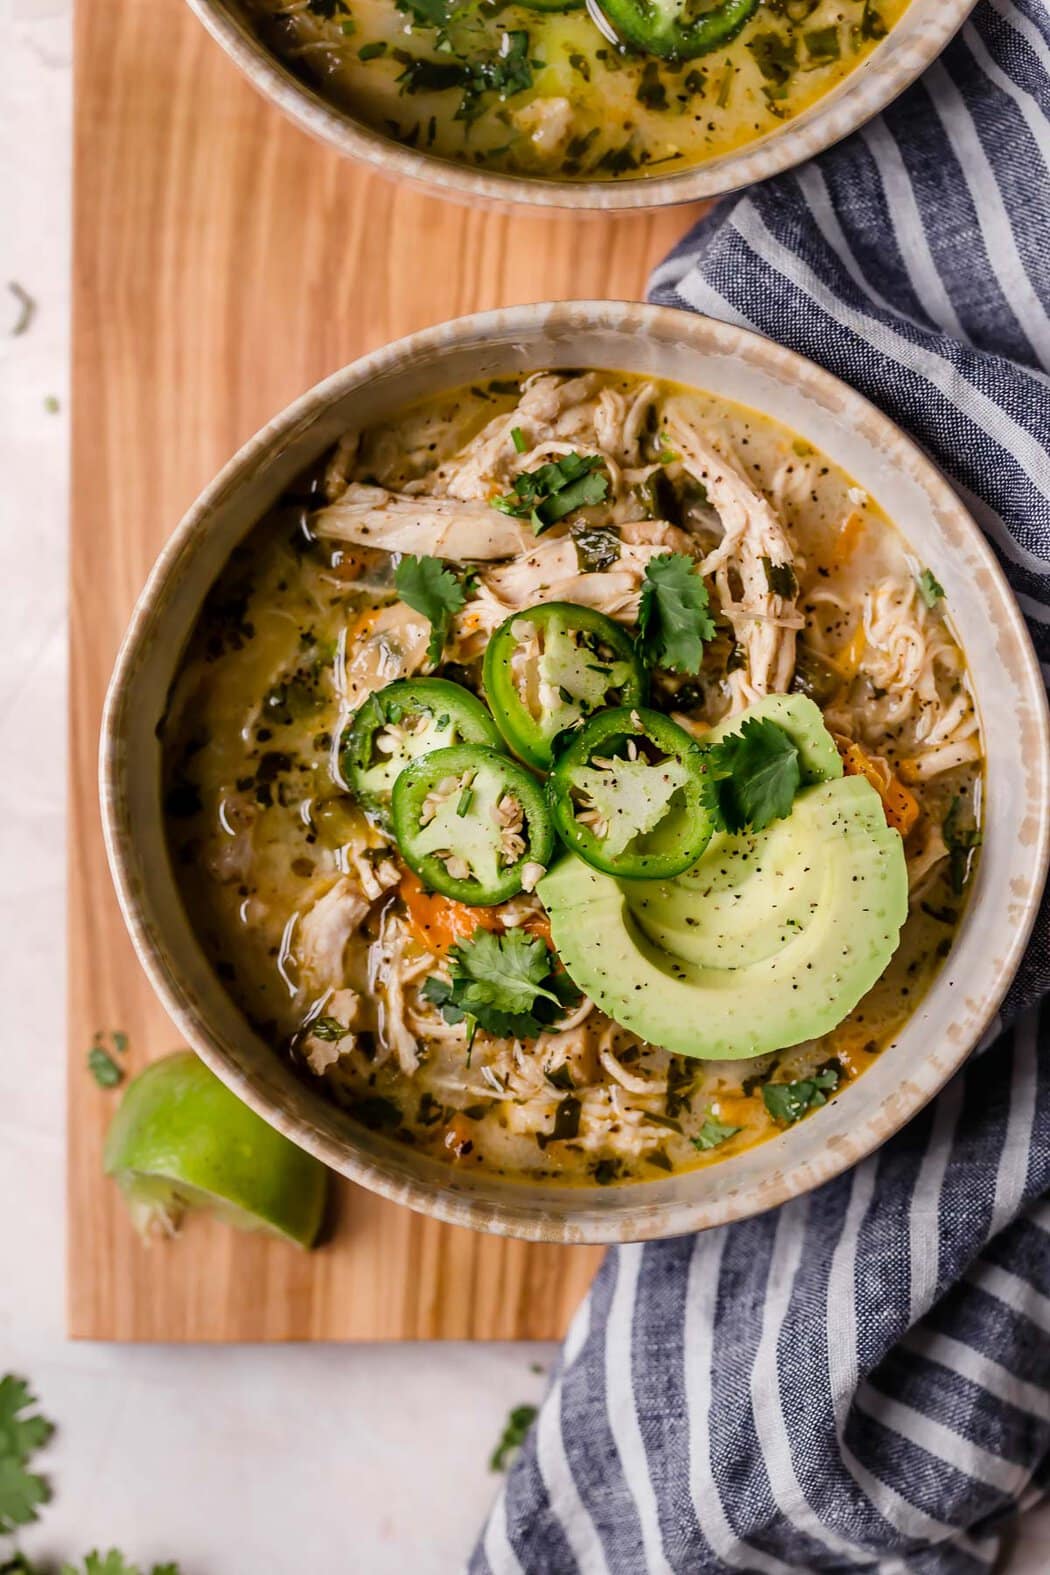 10 Easy Instant Pot Dinner Recipes for Beginners - Real Food Whole Life